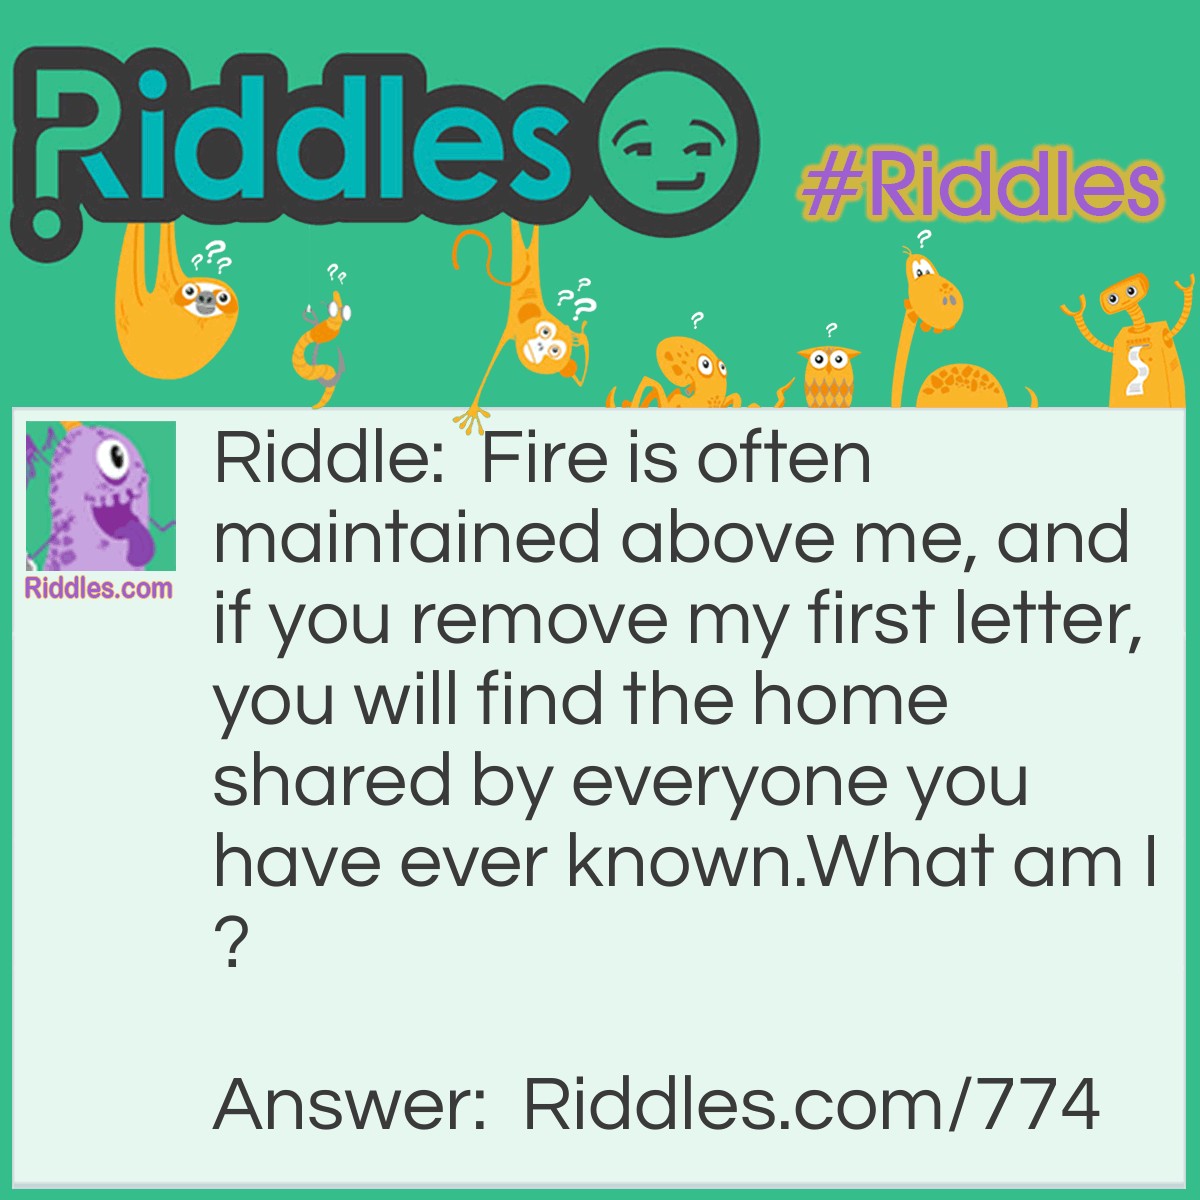 Riddle: Fire is often maintained above me, and if you remove my first letter, you will find the home shared by everyone you have ever known.
What am I? Answer: A Hearth.